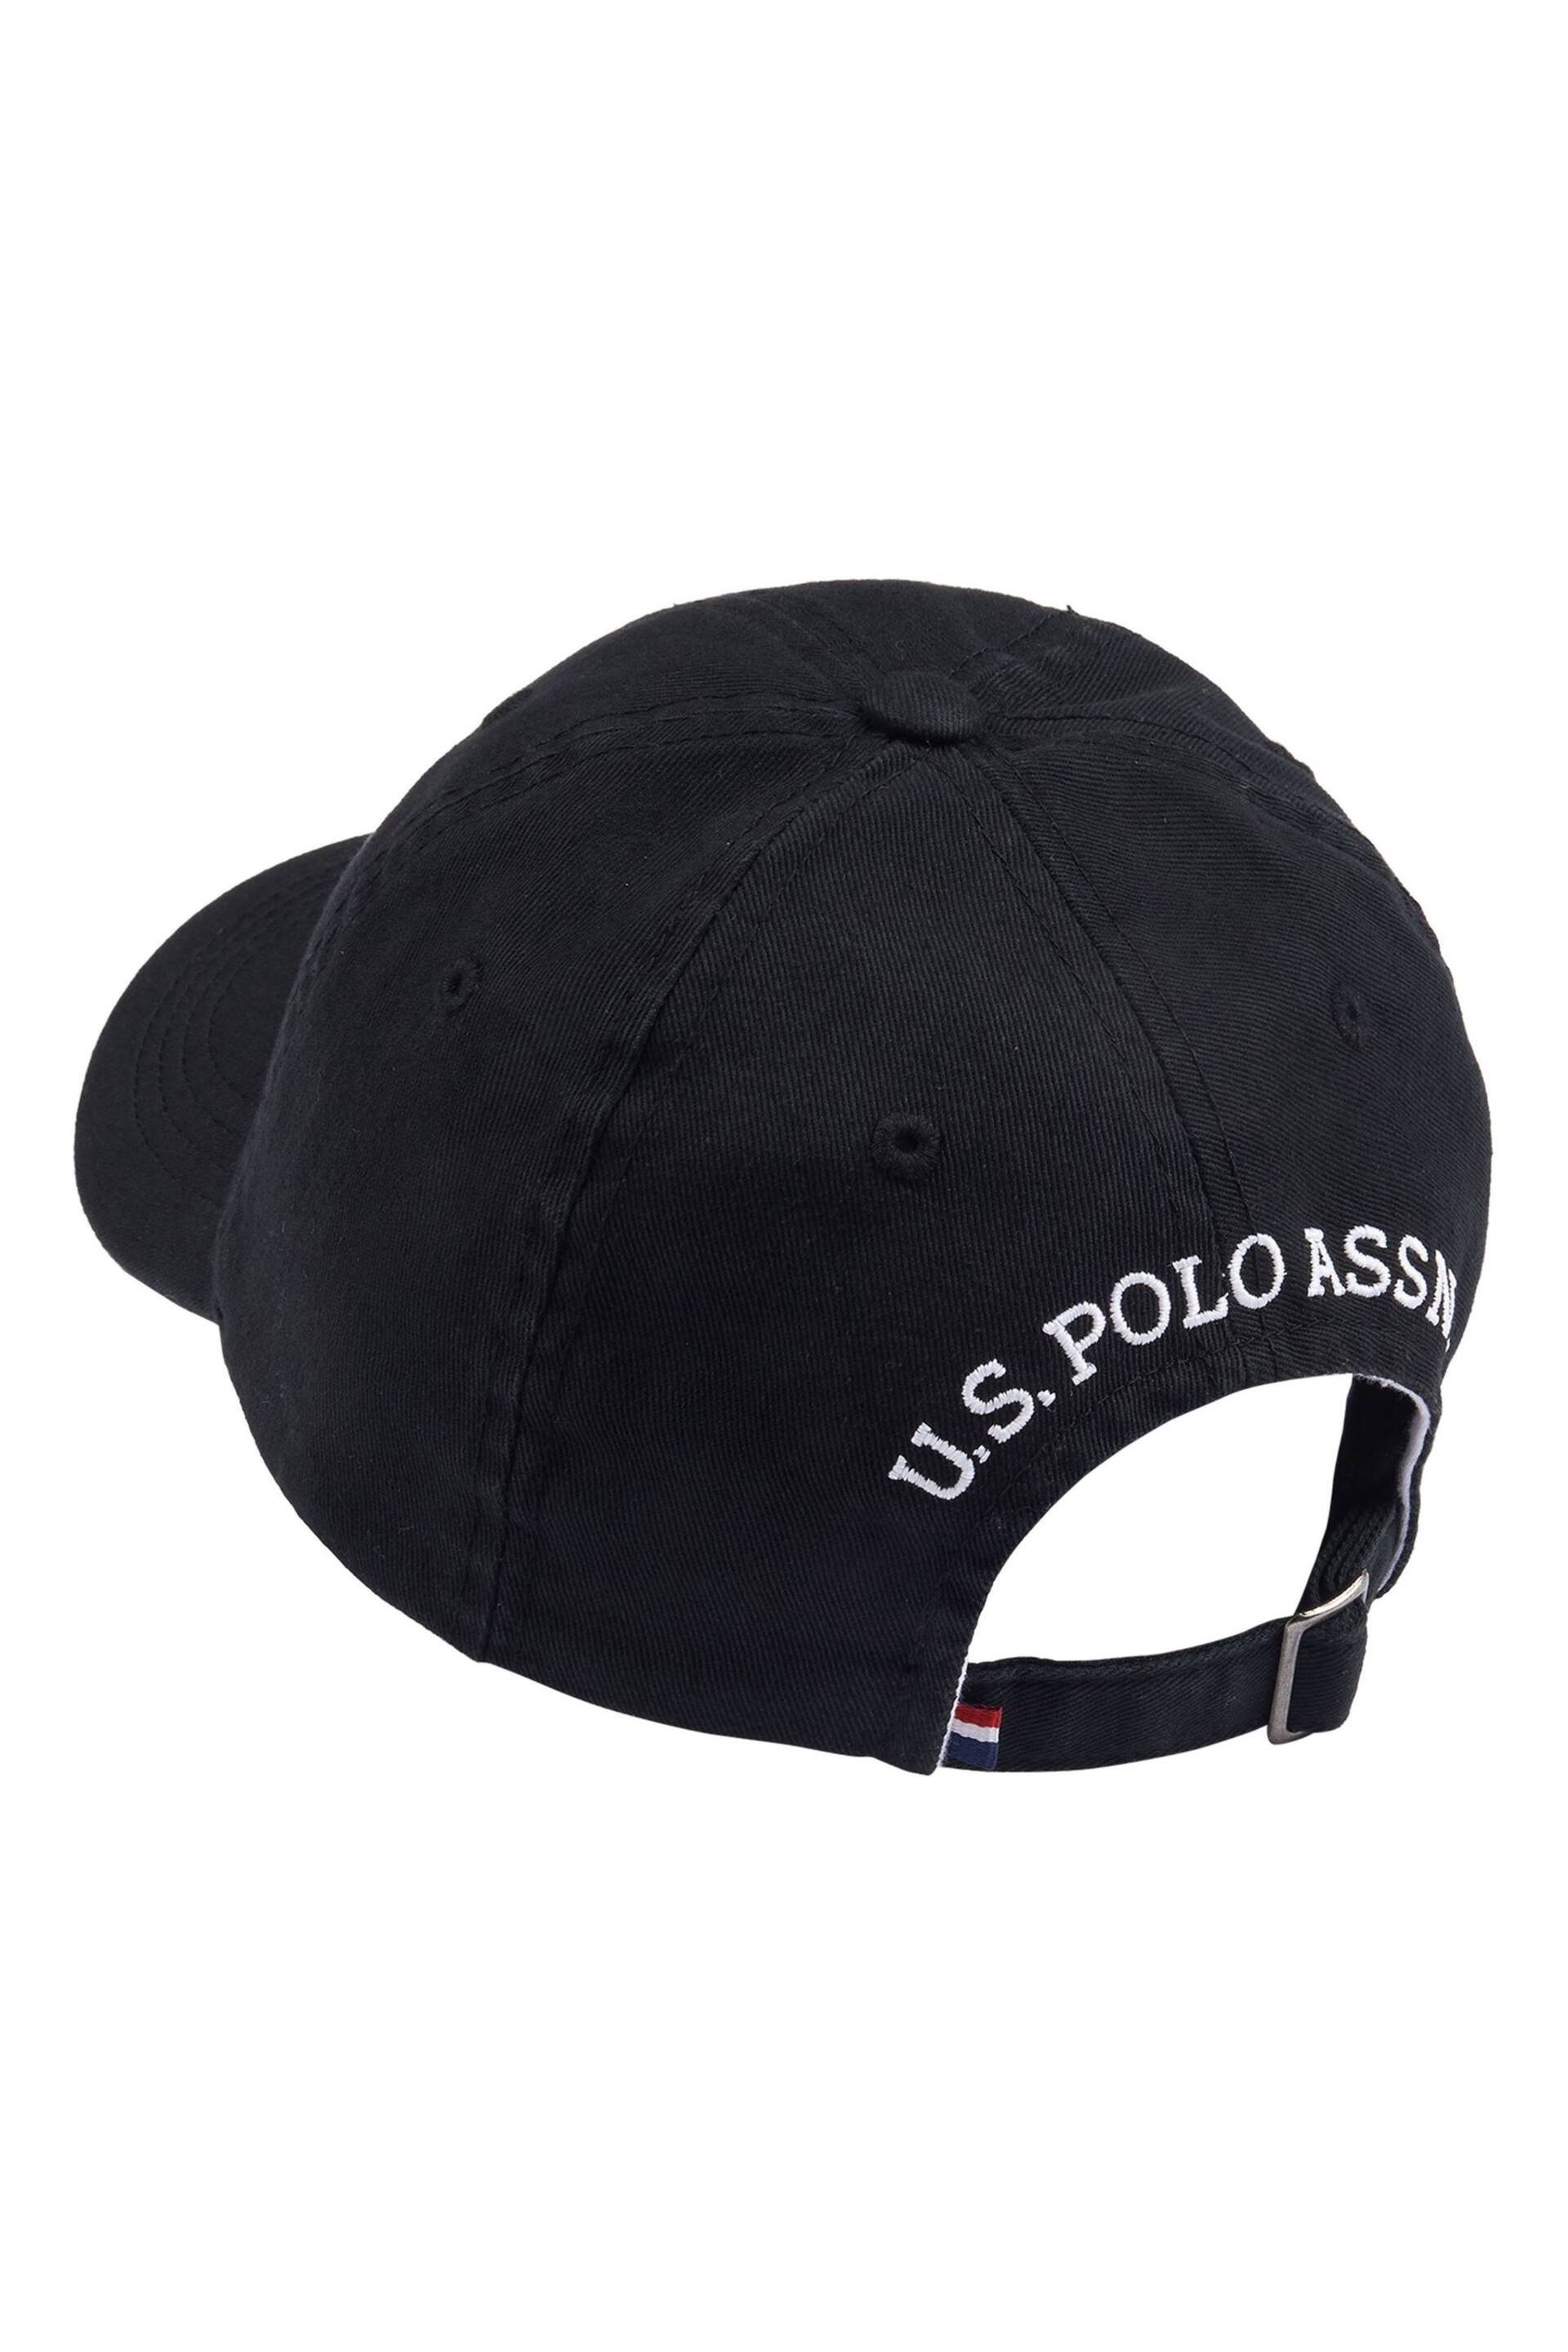 U.S. Polo Assn. Blue Boys Washed Canvas Cap - Image 2 of 2